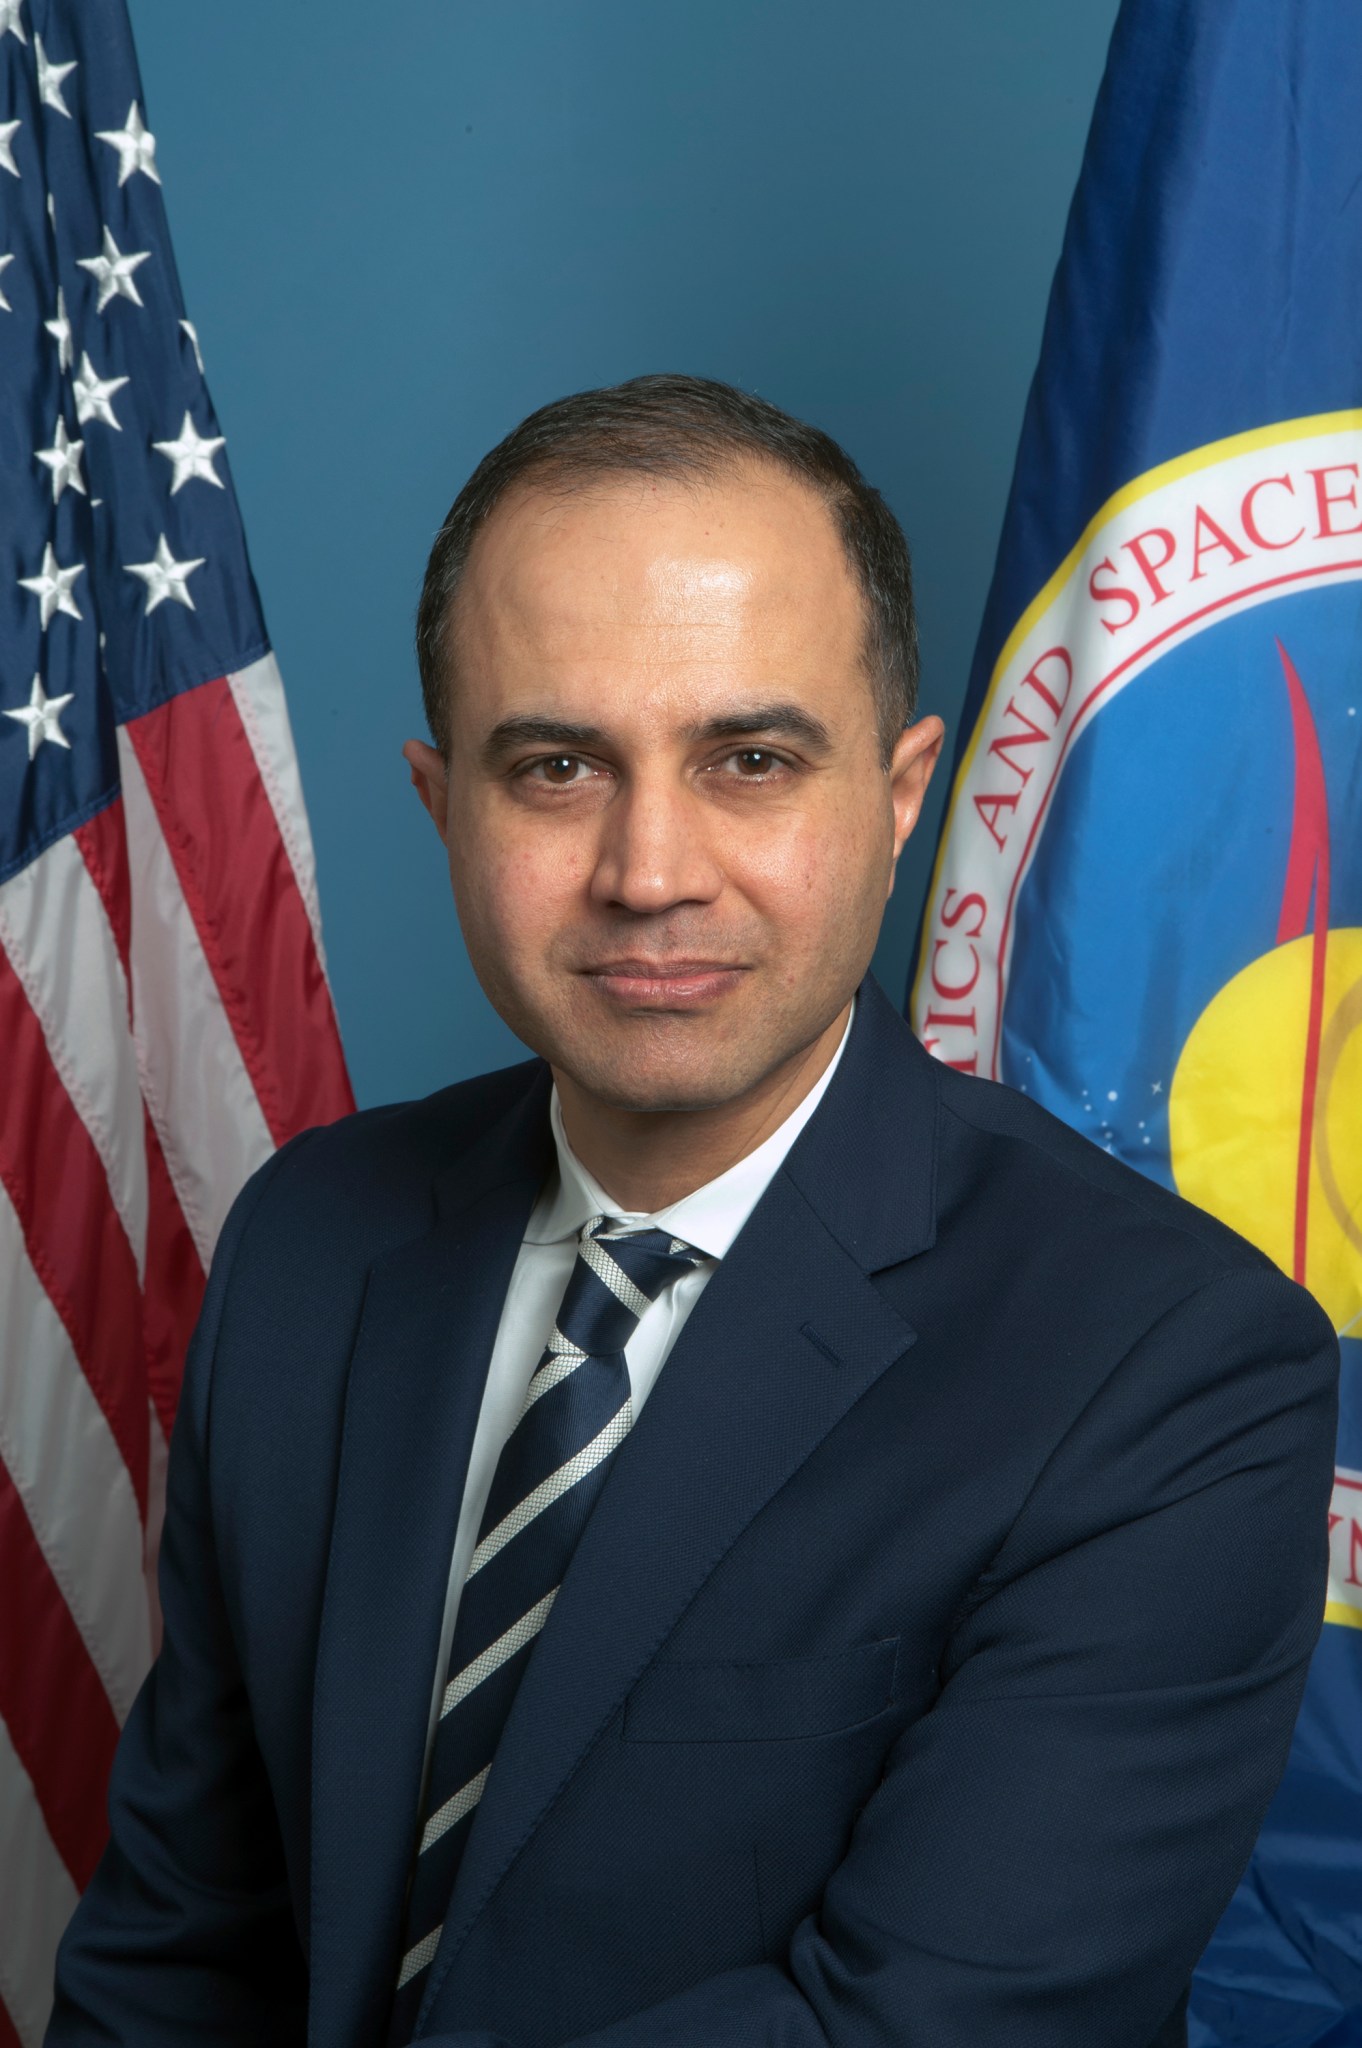 Man with tan skin and black hair wears a navy suit with a navy and white tie against a blue background with the American flag on the left and the NASA flag on the right. 